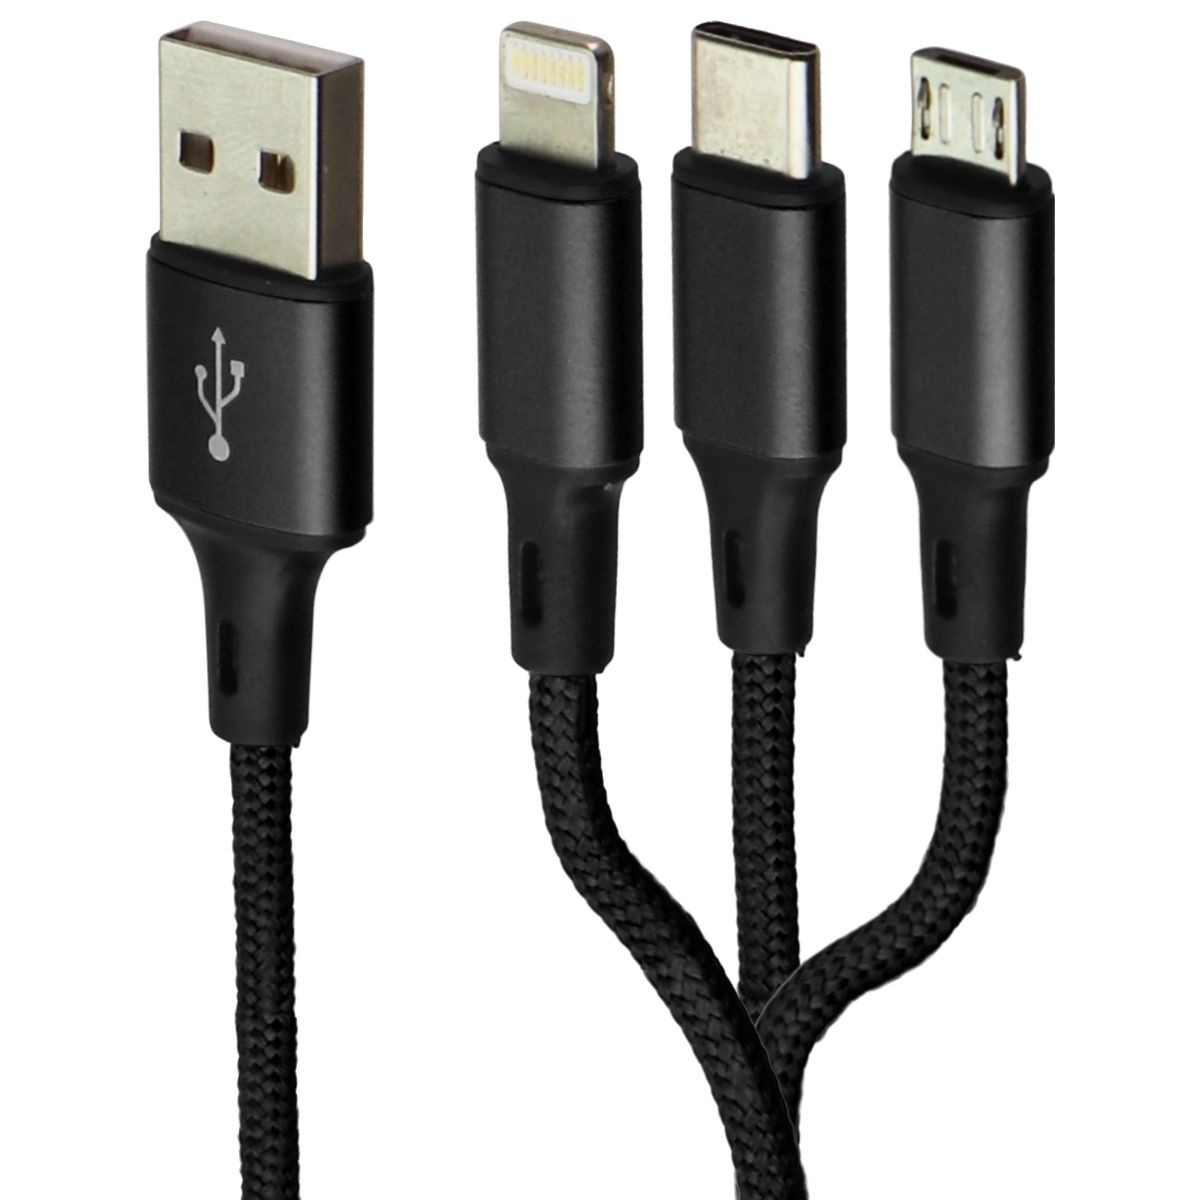 Zoda 3-in-1 USB-C/Lightning 8-Pin/Micro USB Braided Cable (4FT) - Black